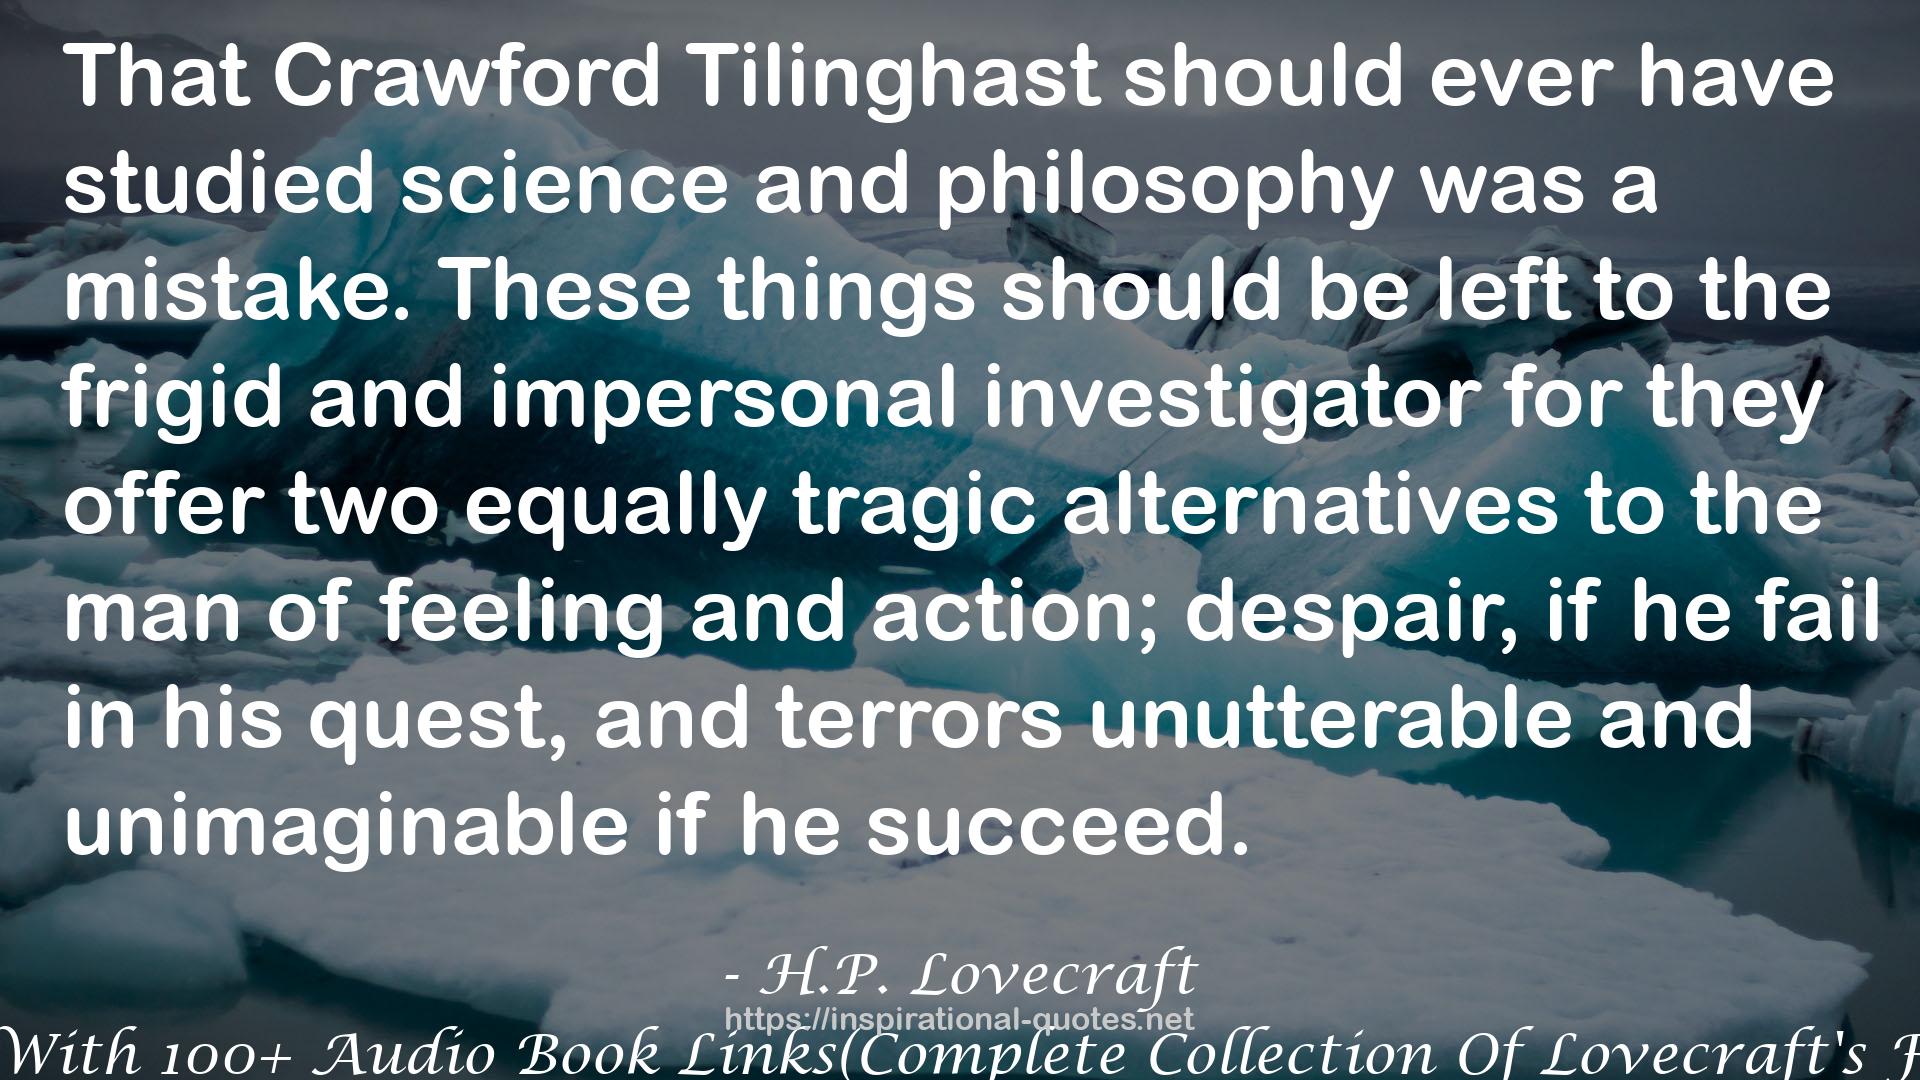 Complete Collection Of H.P.Lovecraft - 150 eBooks With 100+ Audio Book Links(Complete Collection Of Lovecraft's Fiction,Juvenilia,Poems,Essays And Collaborations) QUOTES